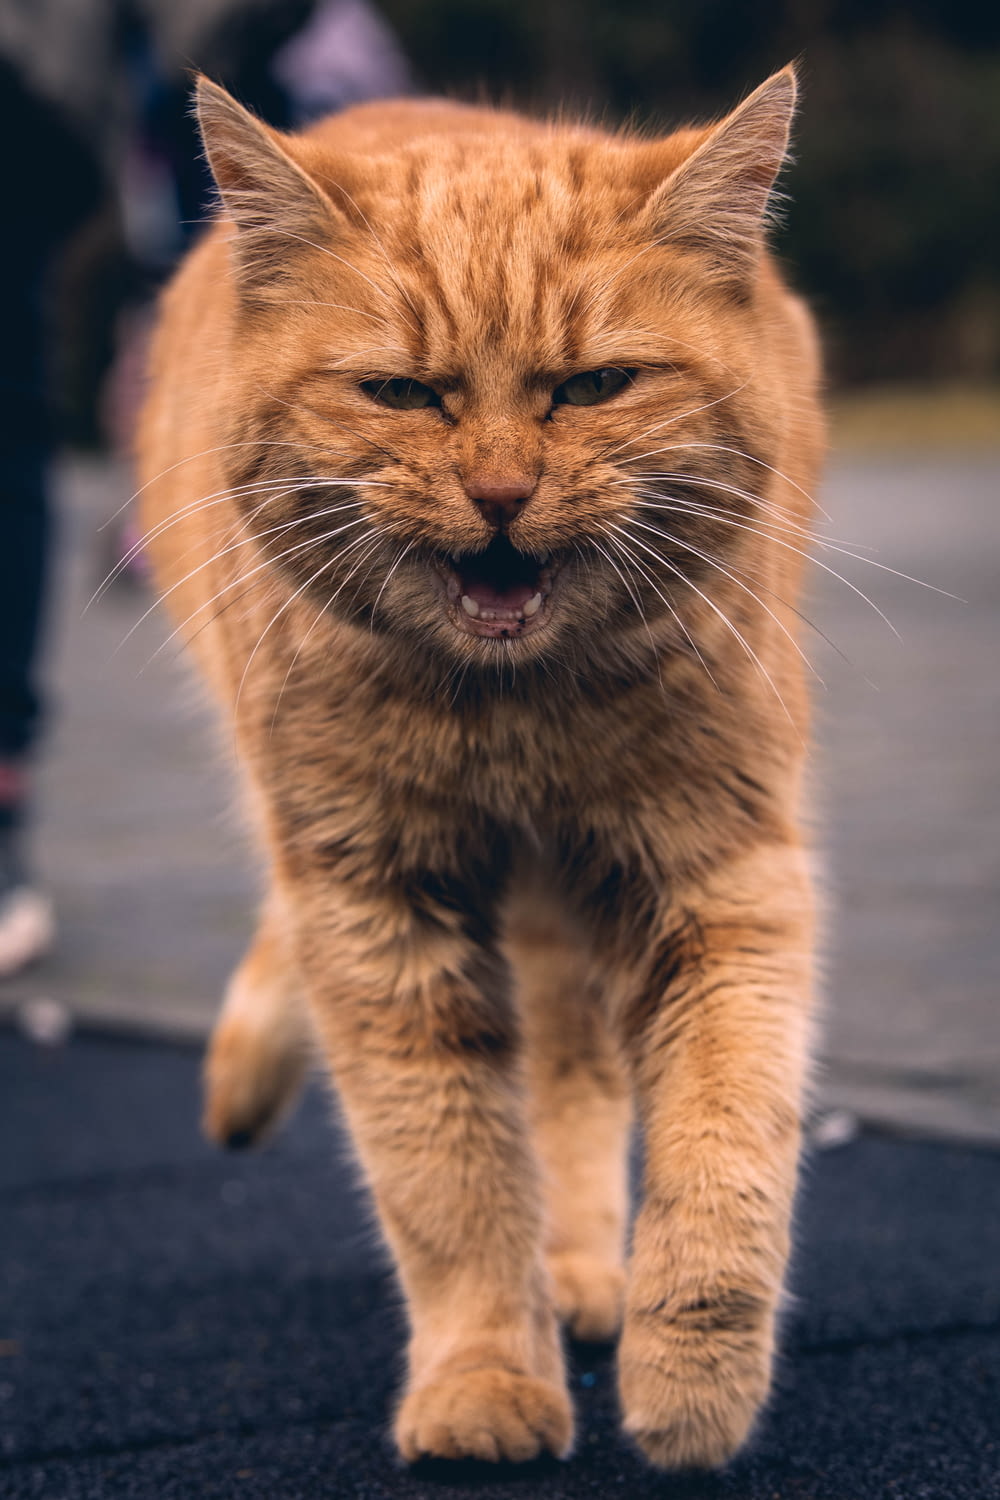 a close up of a cat walking on a street